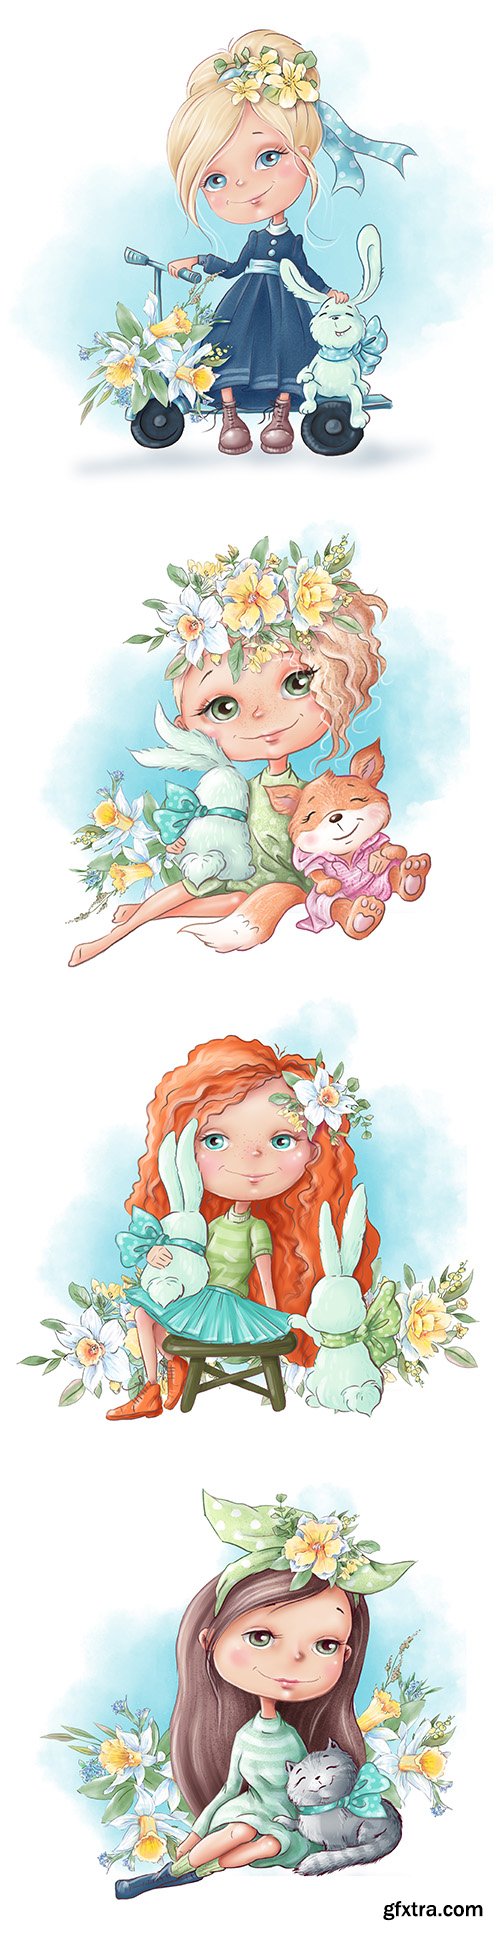 Cute girl with flowers and rabbit painted illustrations